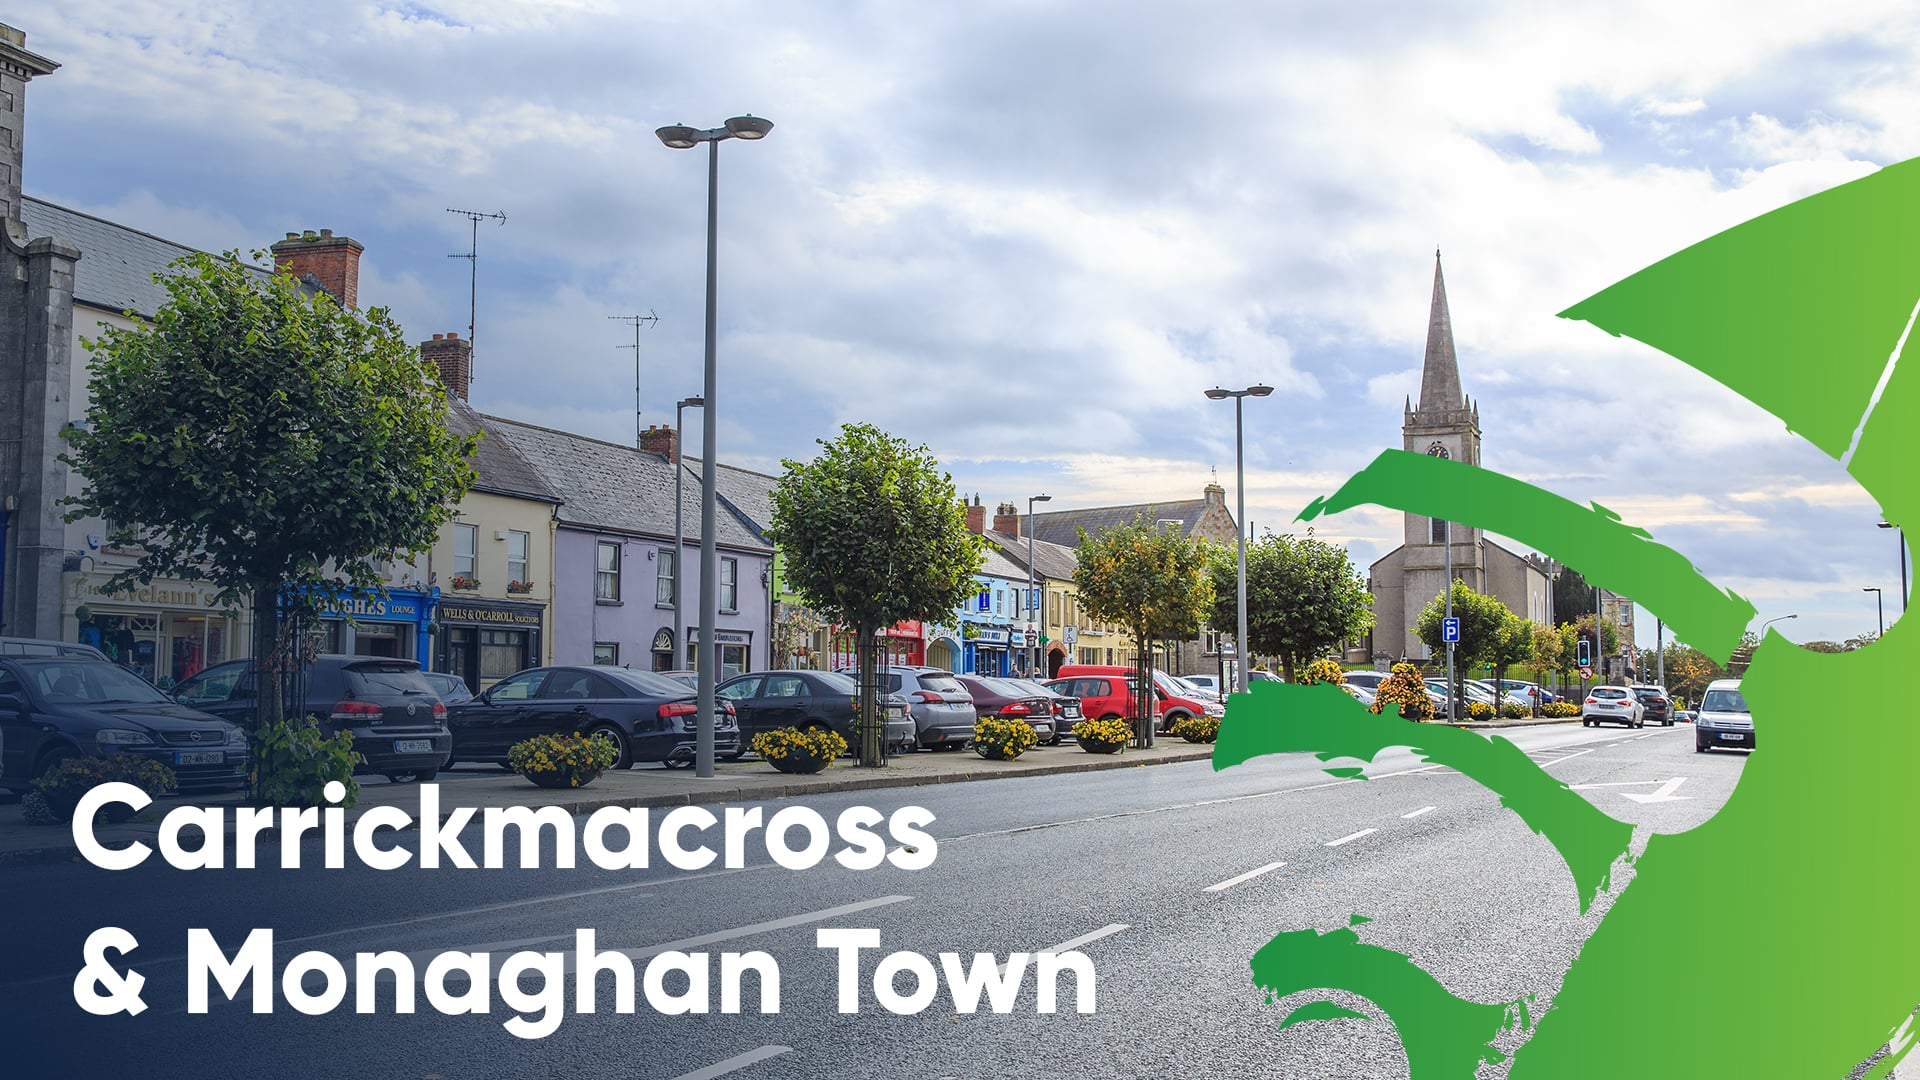 Rural-Wifi-popup-events-in-Monaghan-Town-and-Carrickmacross